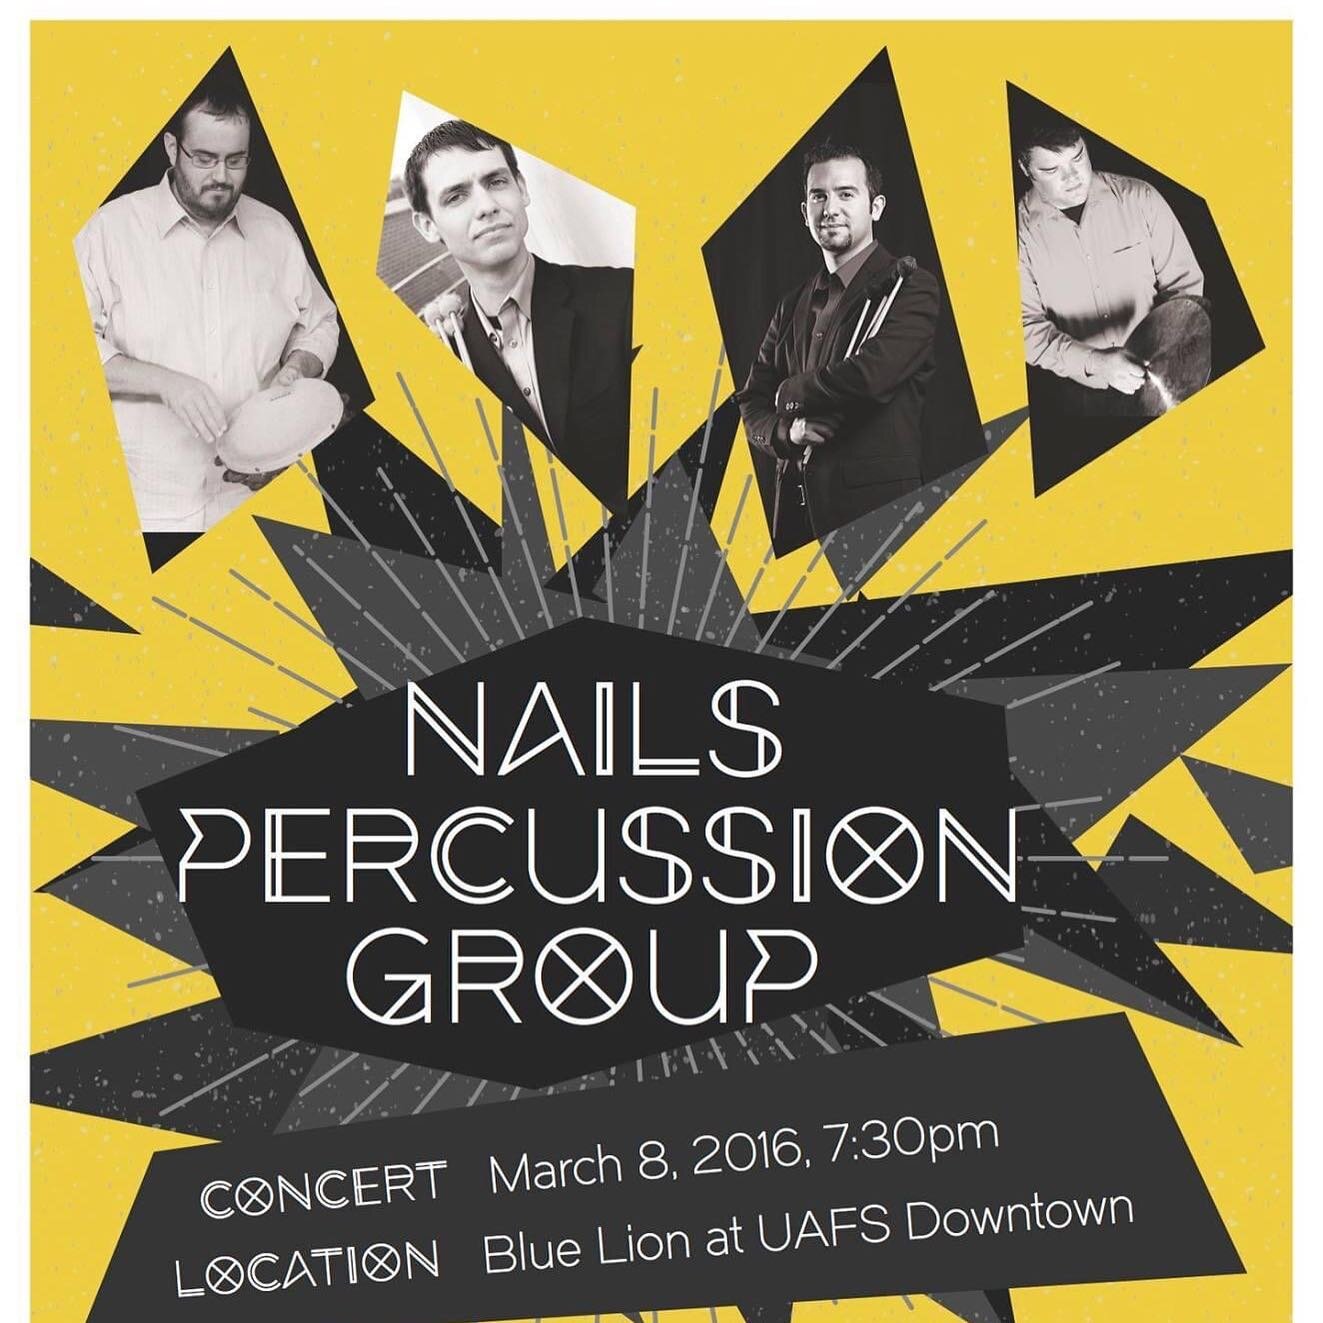 Throwback Thursday to 5 years ago today! Wow, This feels like yesterday. Can&rsquo;t wait to do it again with these guys! #music #percussion #percussionist #percussionensemble #stephenfaustinstateuniversity #nacogdoches @groverpro @pearladamspercussi